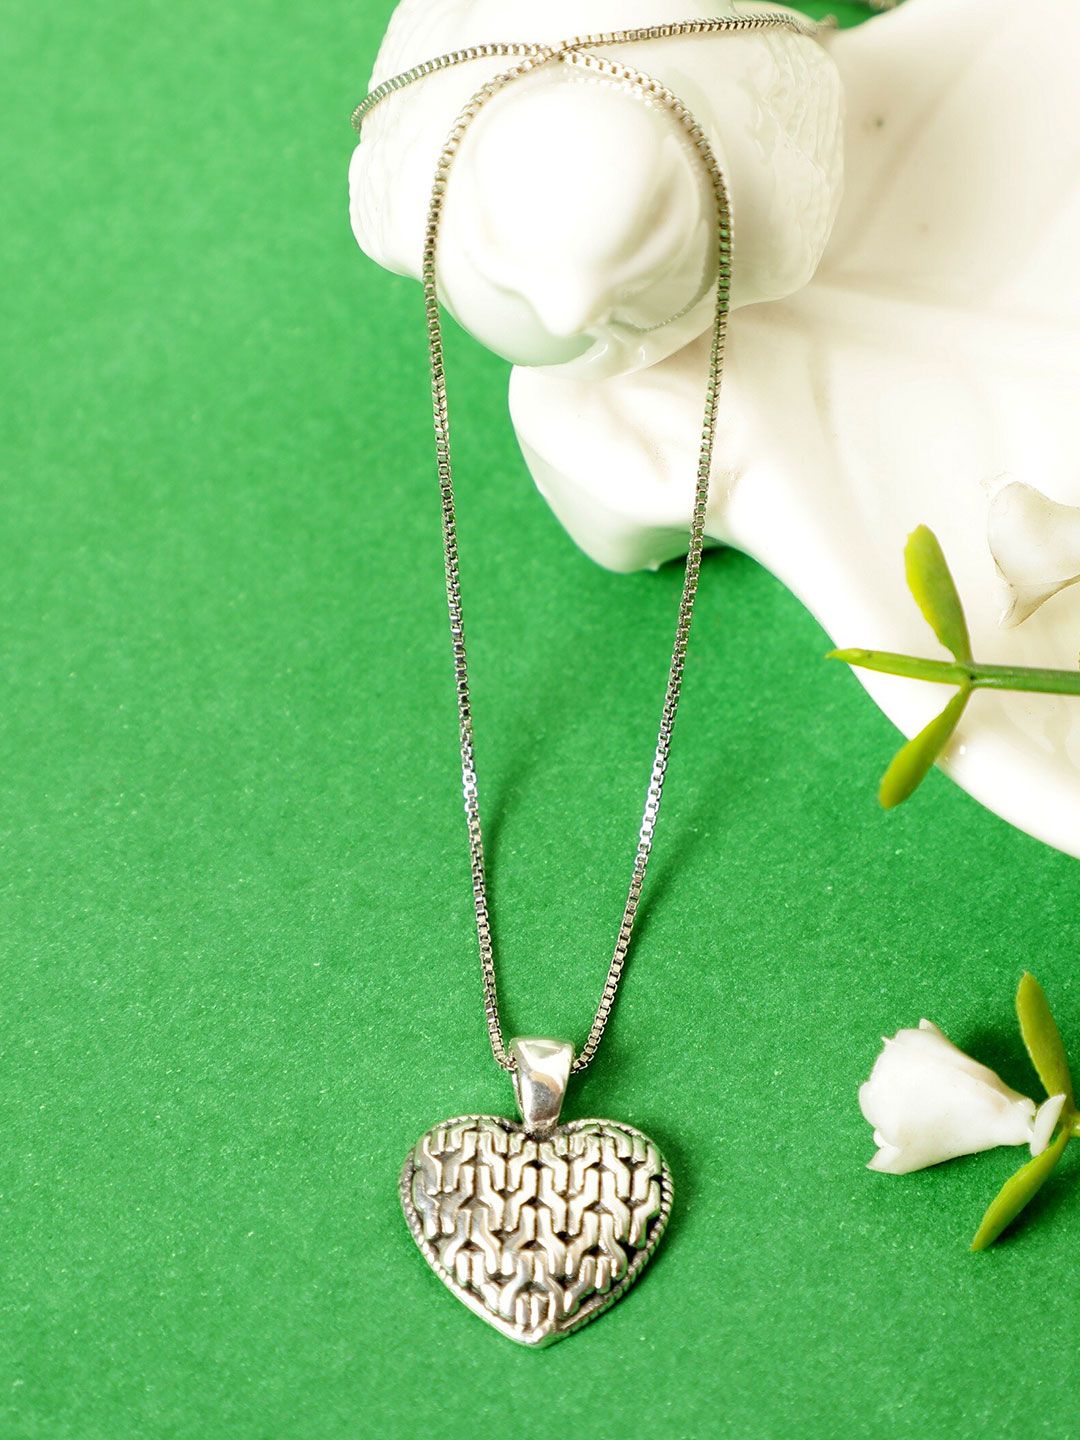 GIVA 925 Oxidised Silver Charming Heart Pendant with Chain Price in India